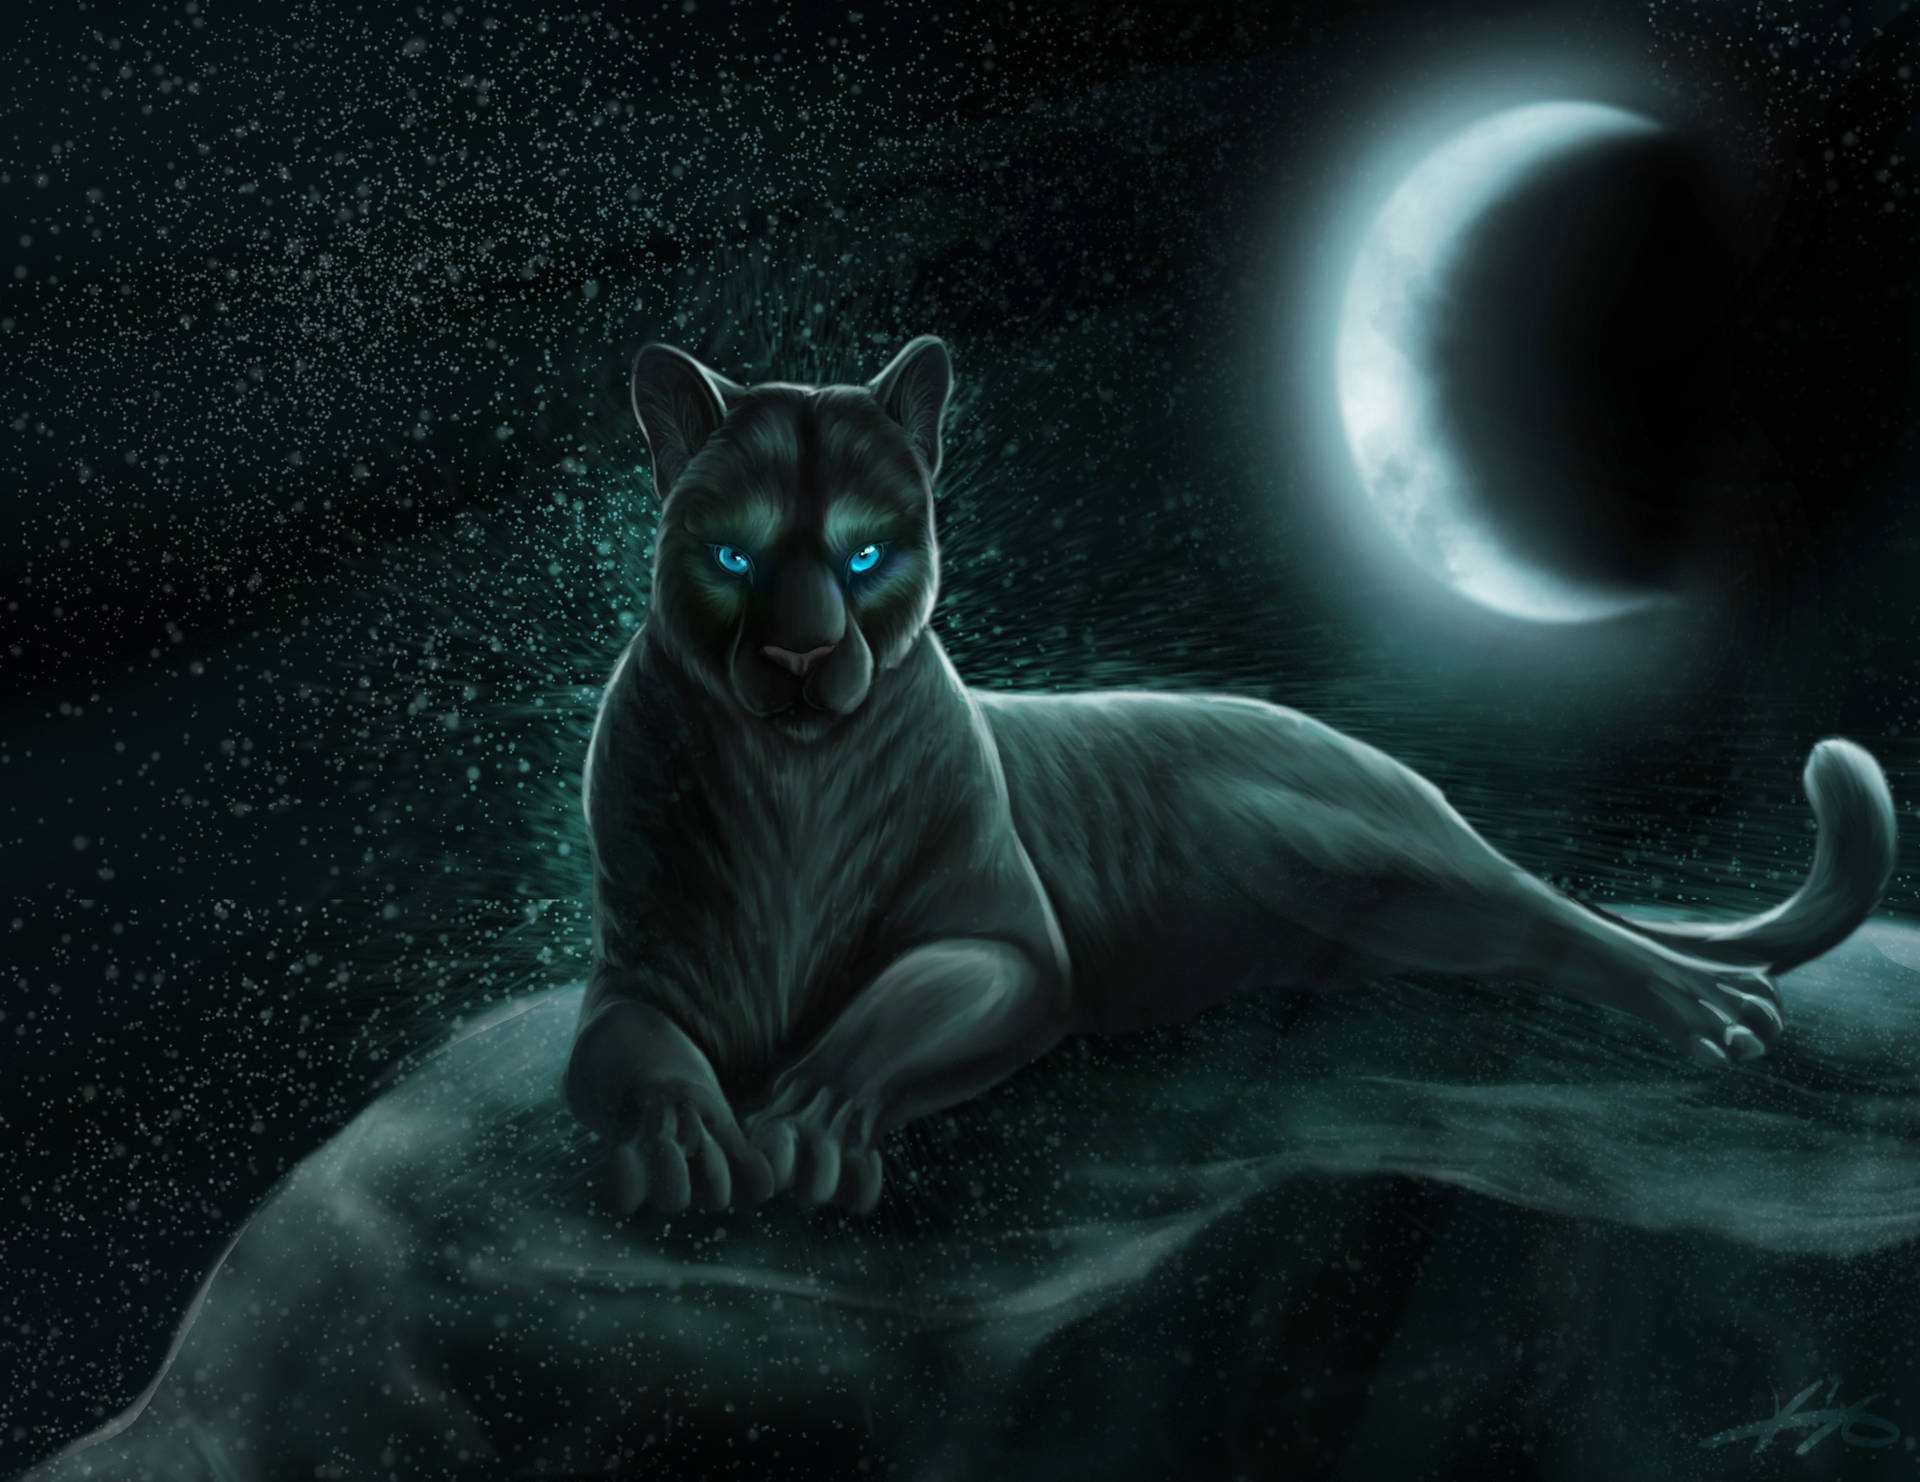 Fantasy Black Panther In The Moonlight